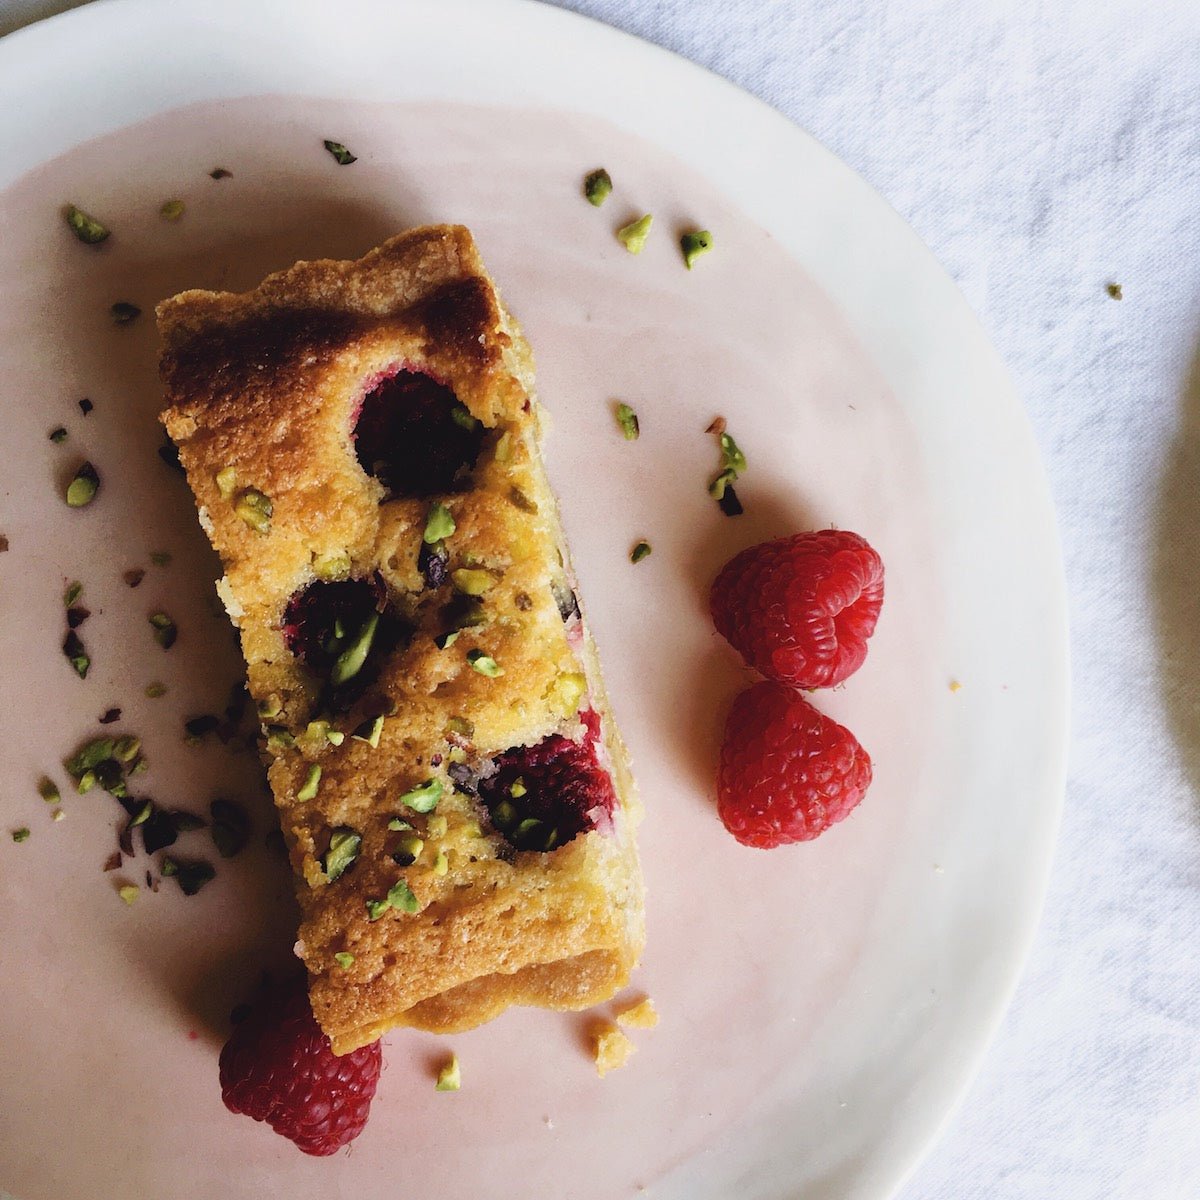 Frangipane Tart with Raspberries & Pistachios from Bronte Recipe - Feast Italy